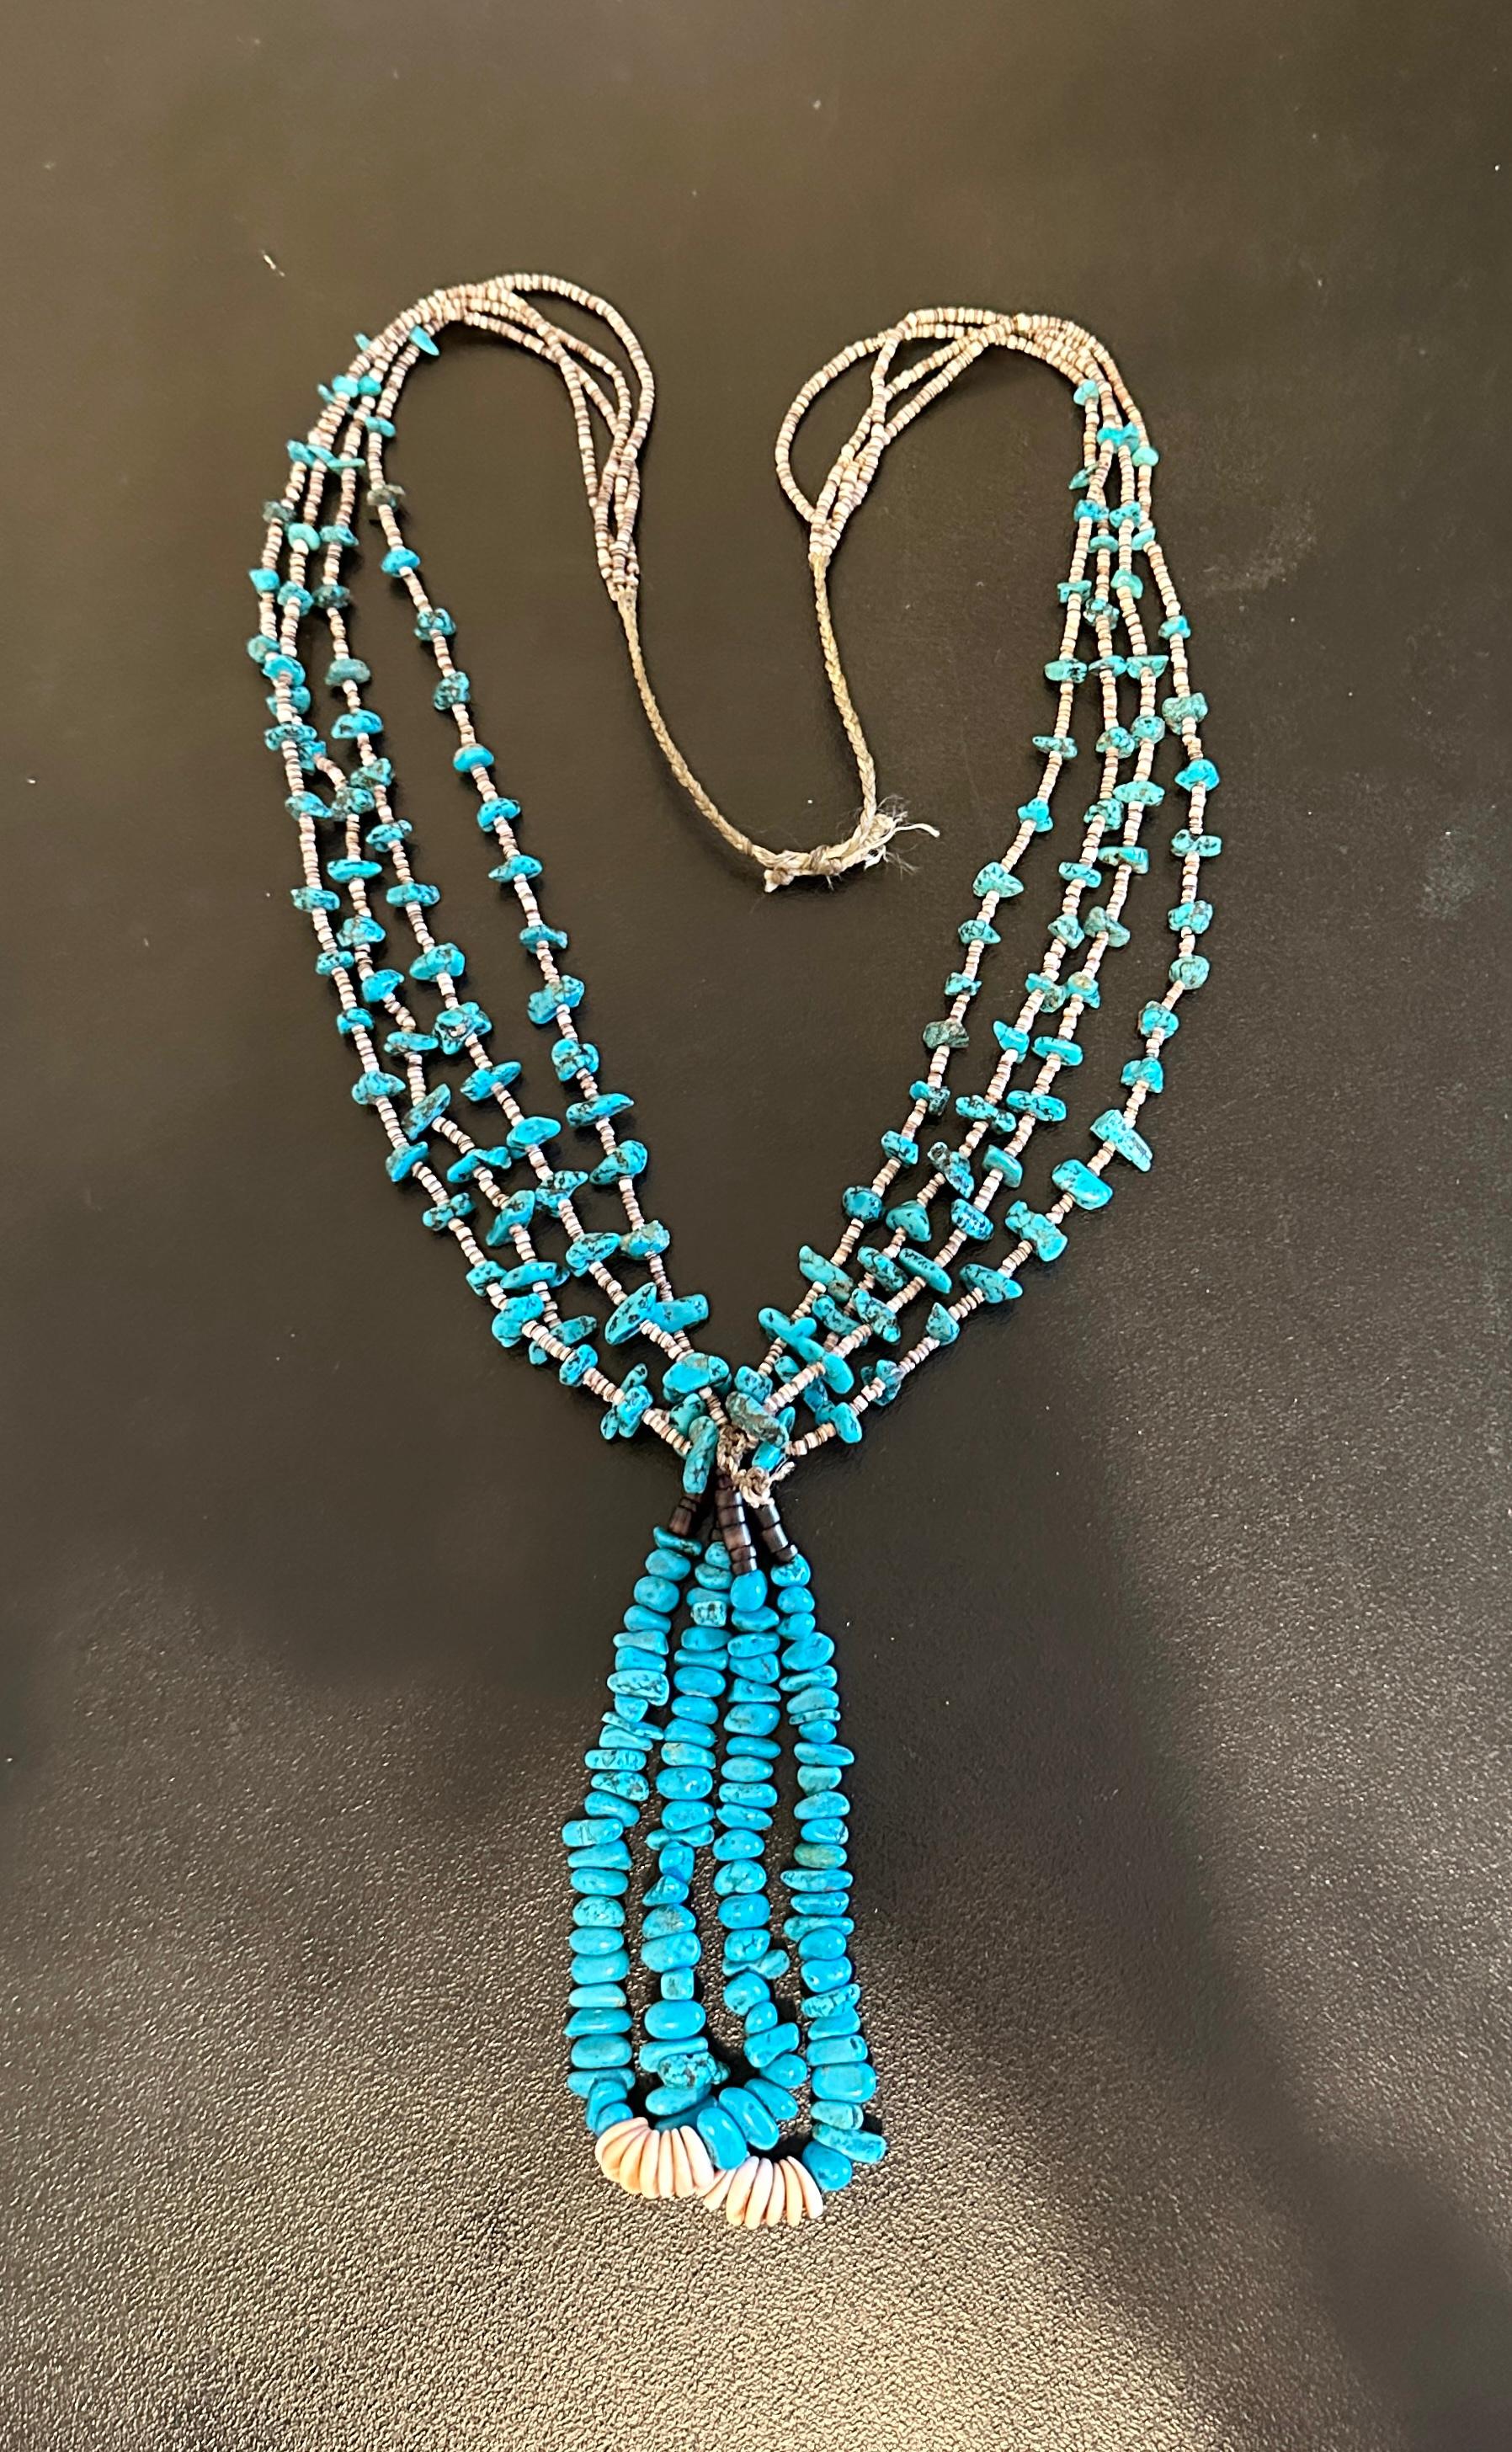 THIS IS A MAGNIFICENT ANTIQUE SANTO DOMINGO NATIVE AMERICAN INDIAN TURQUOISE FOUR STRAND JACLA NECKLACE WITH FANTASTIC EARLY NATURAL TURQUOISE OF EXQUISITE COLOR WITH CLAM SHELL BEADS AND STUNNING TINY HEISHI BEADS.  THE VERY RARE HAND MADE NECKLACE